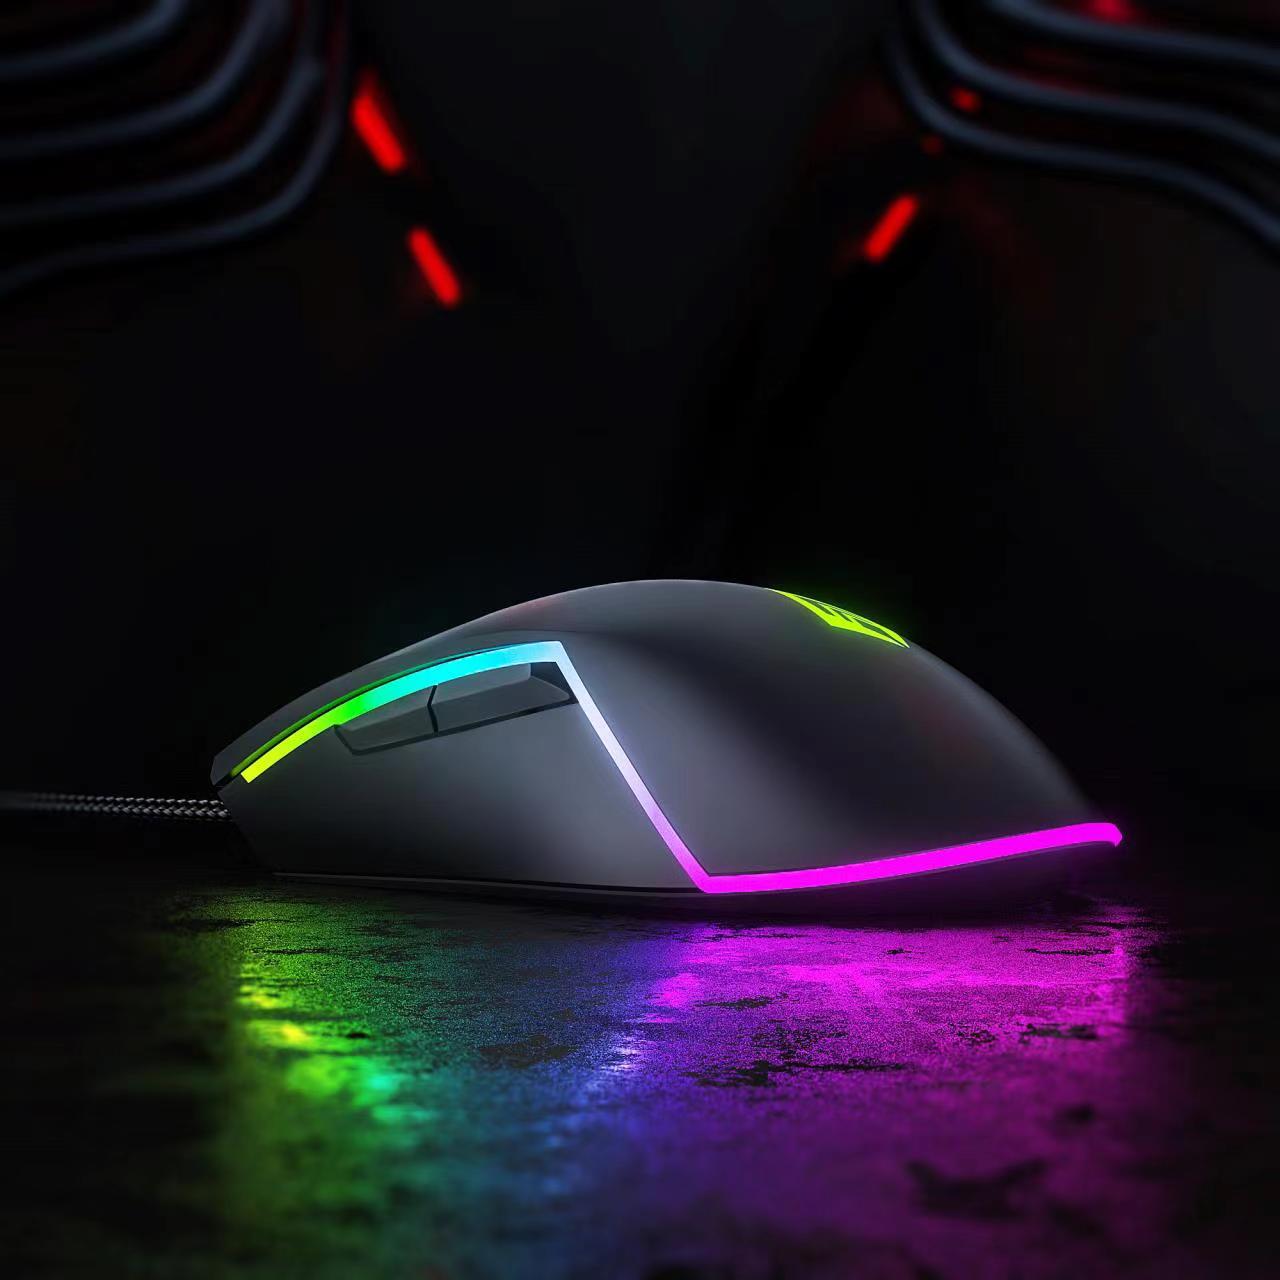 Recurve 500 RGB Gaming Mouse